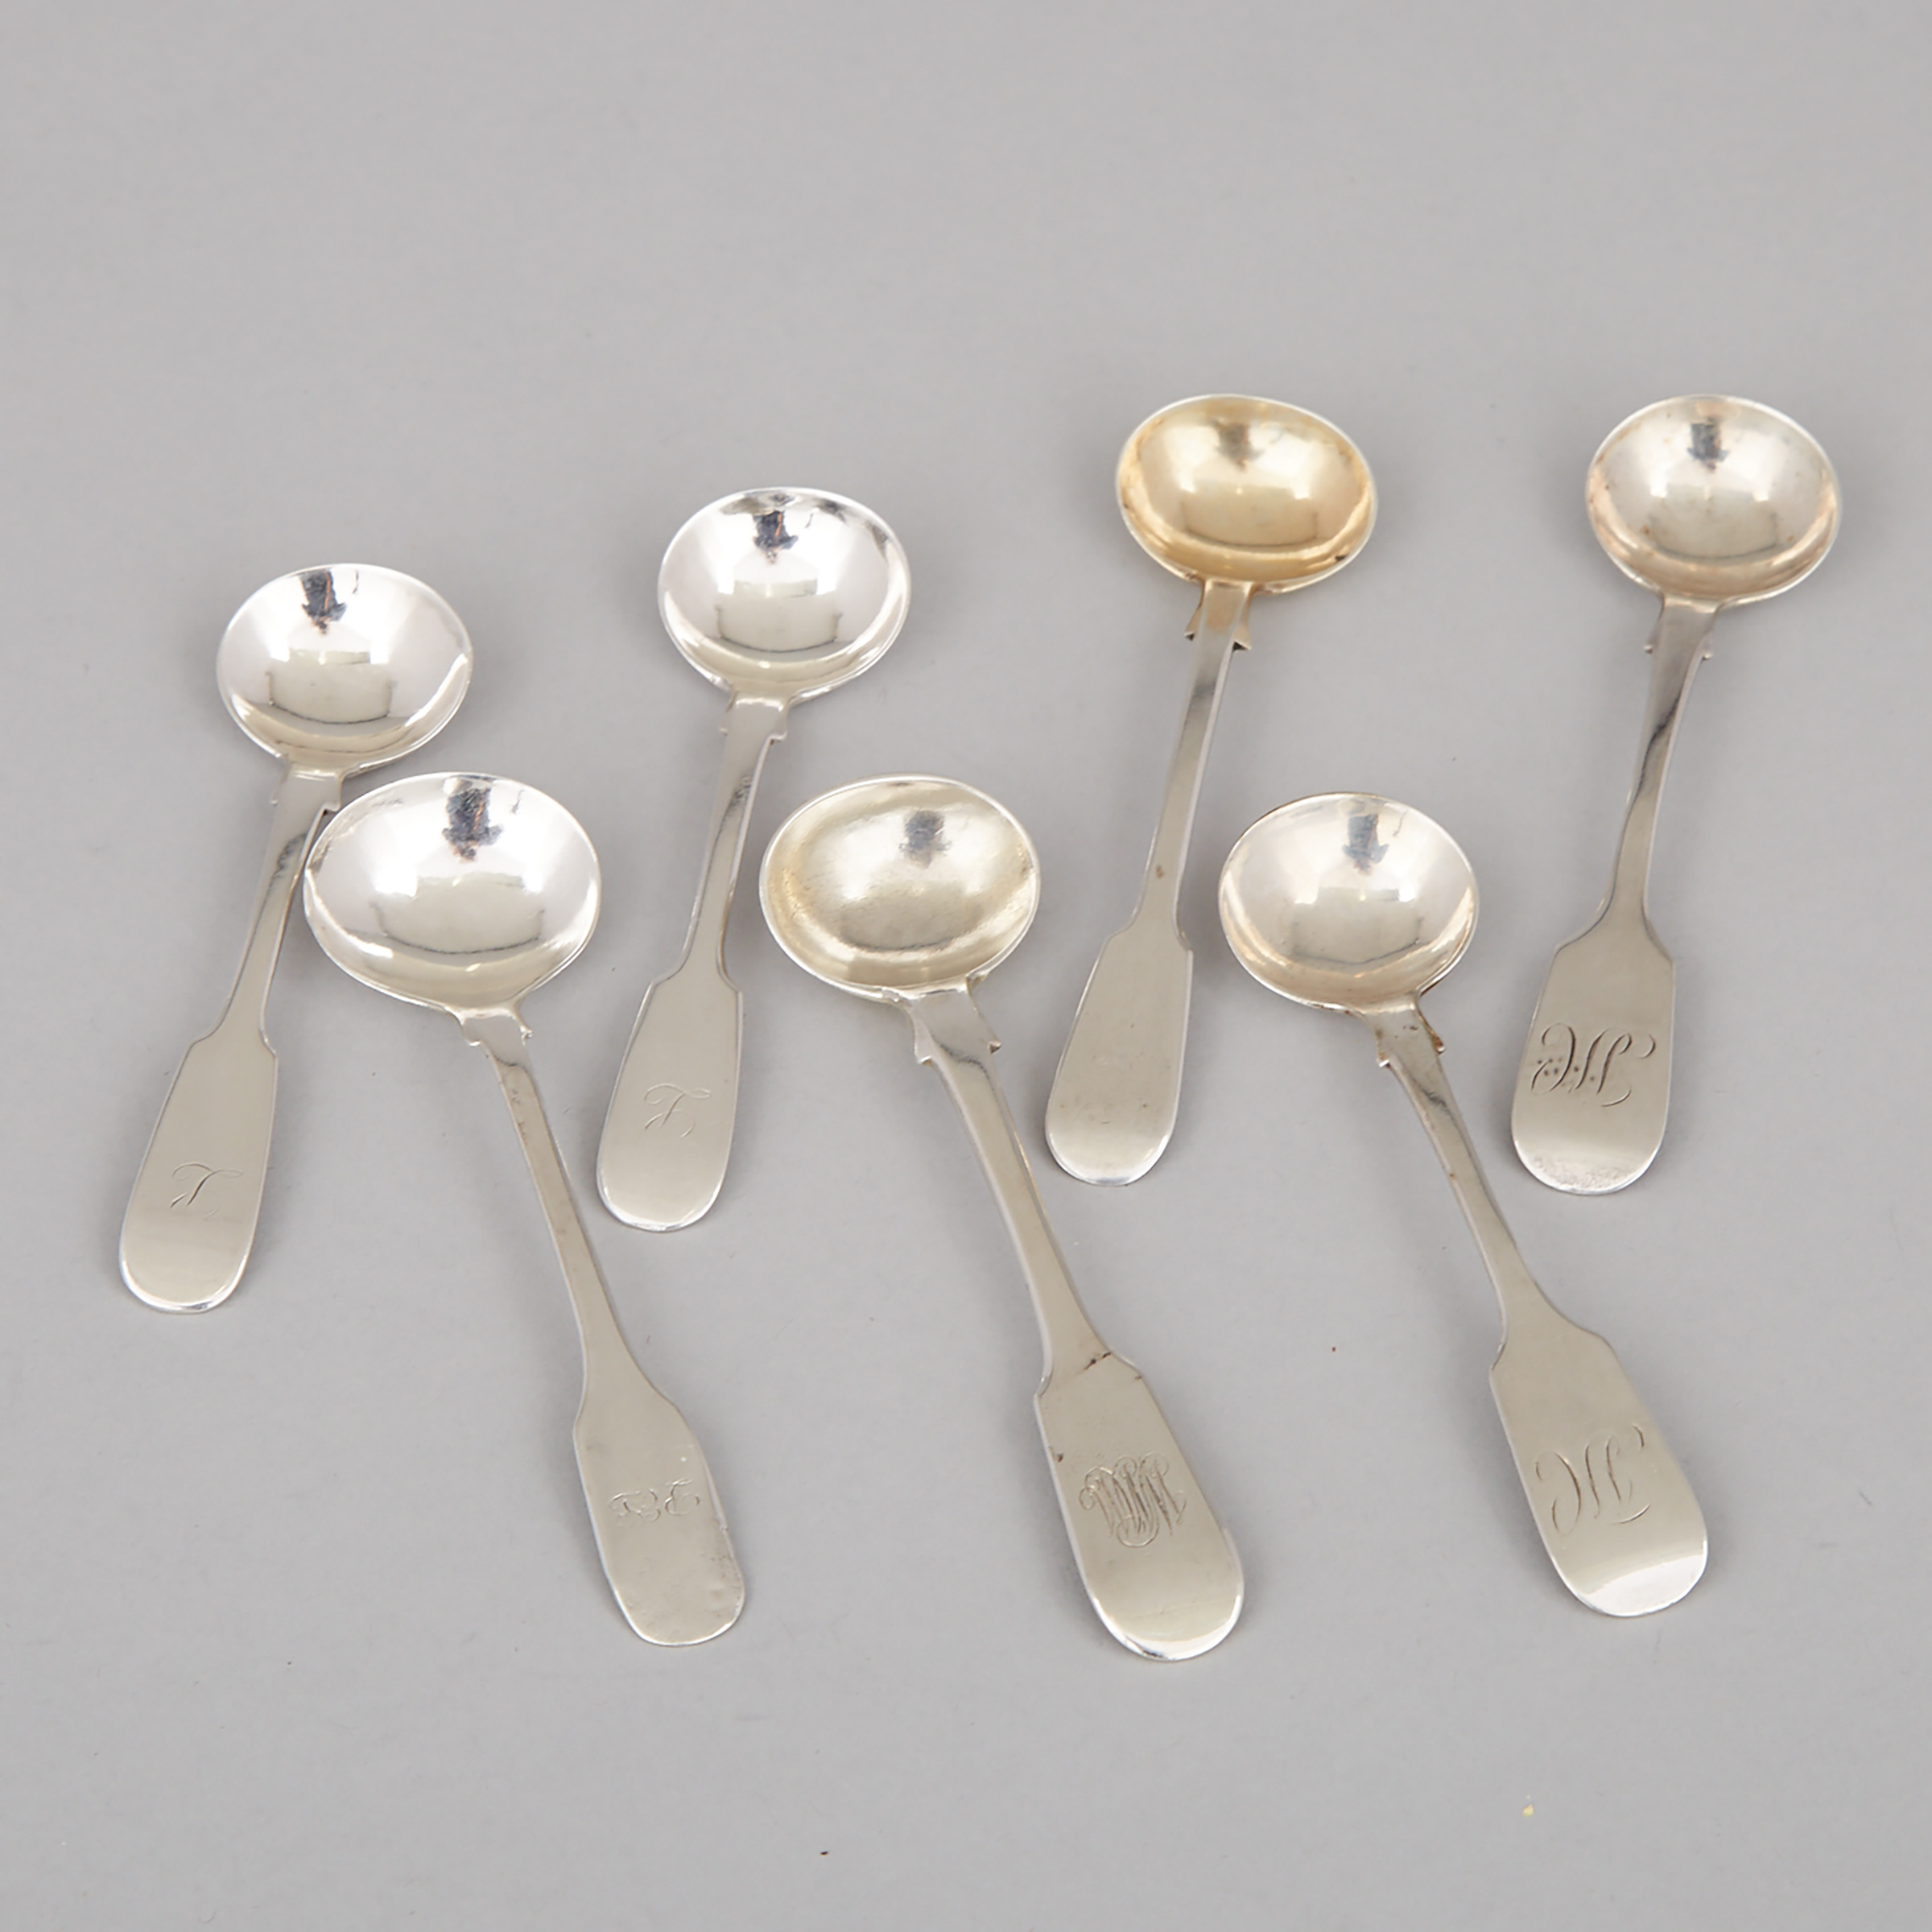 Seven Canadian Silver Fiddle Pattern Salt Spoons, 19th century